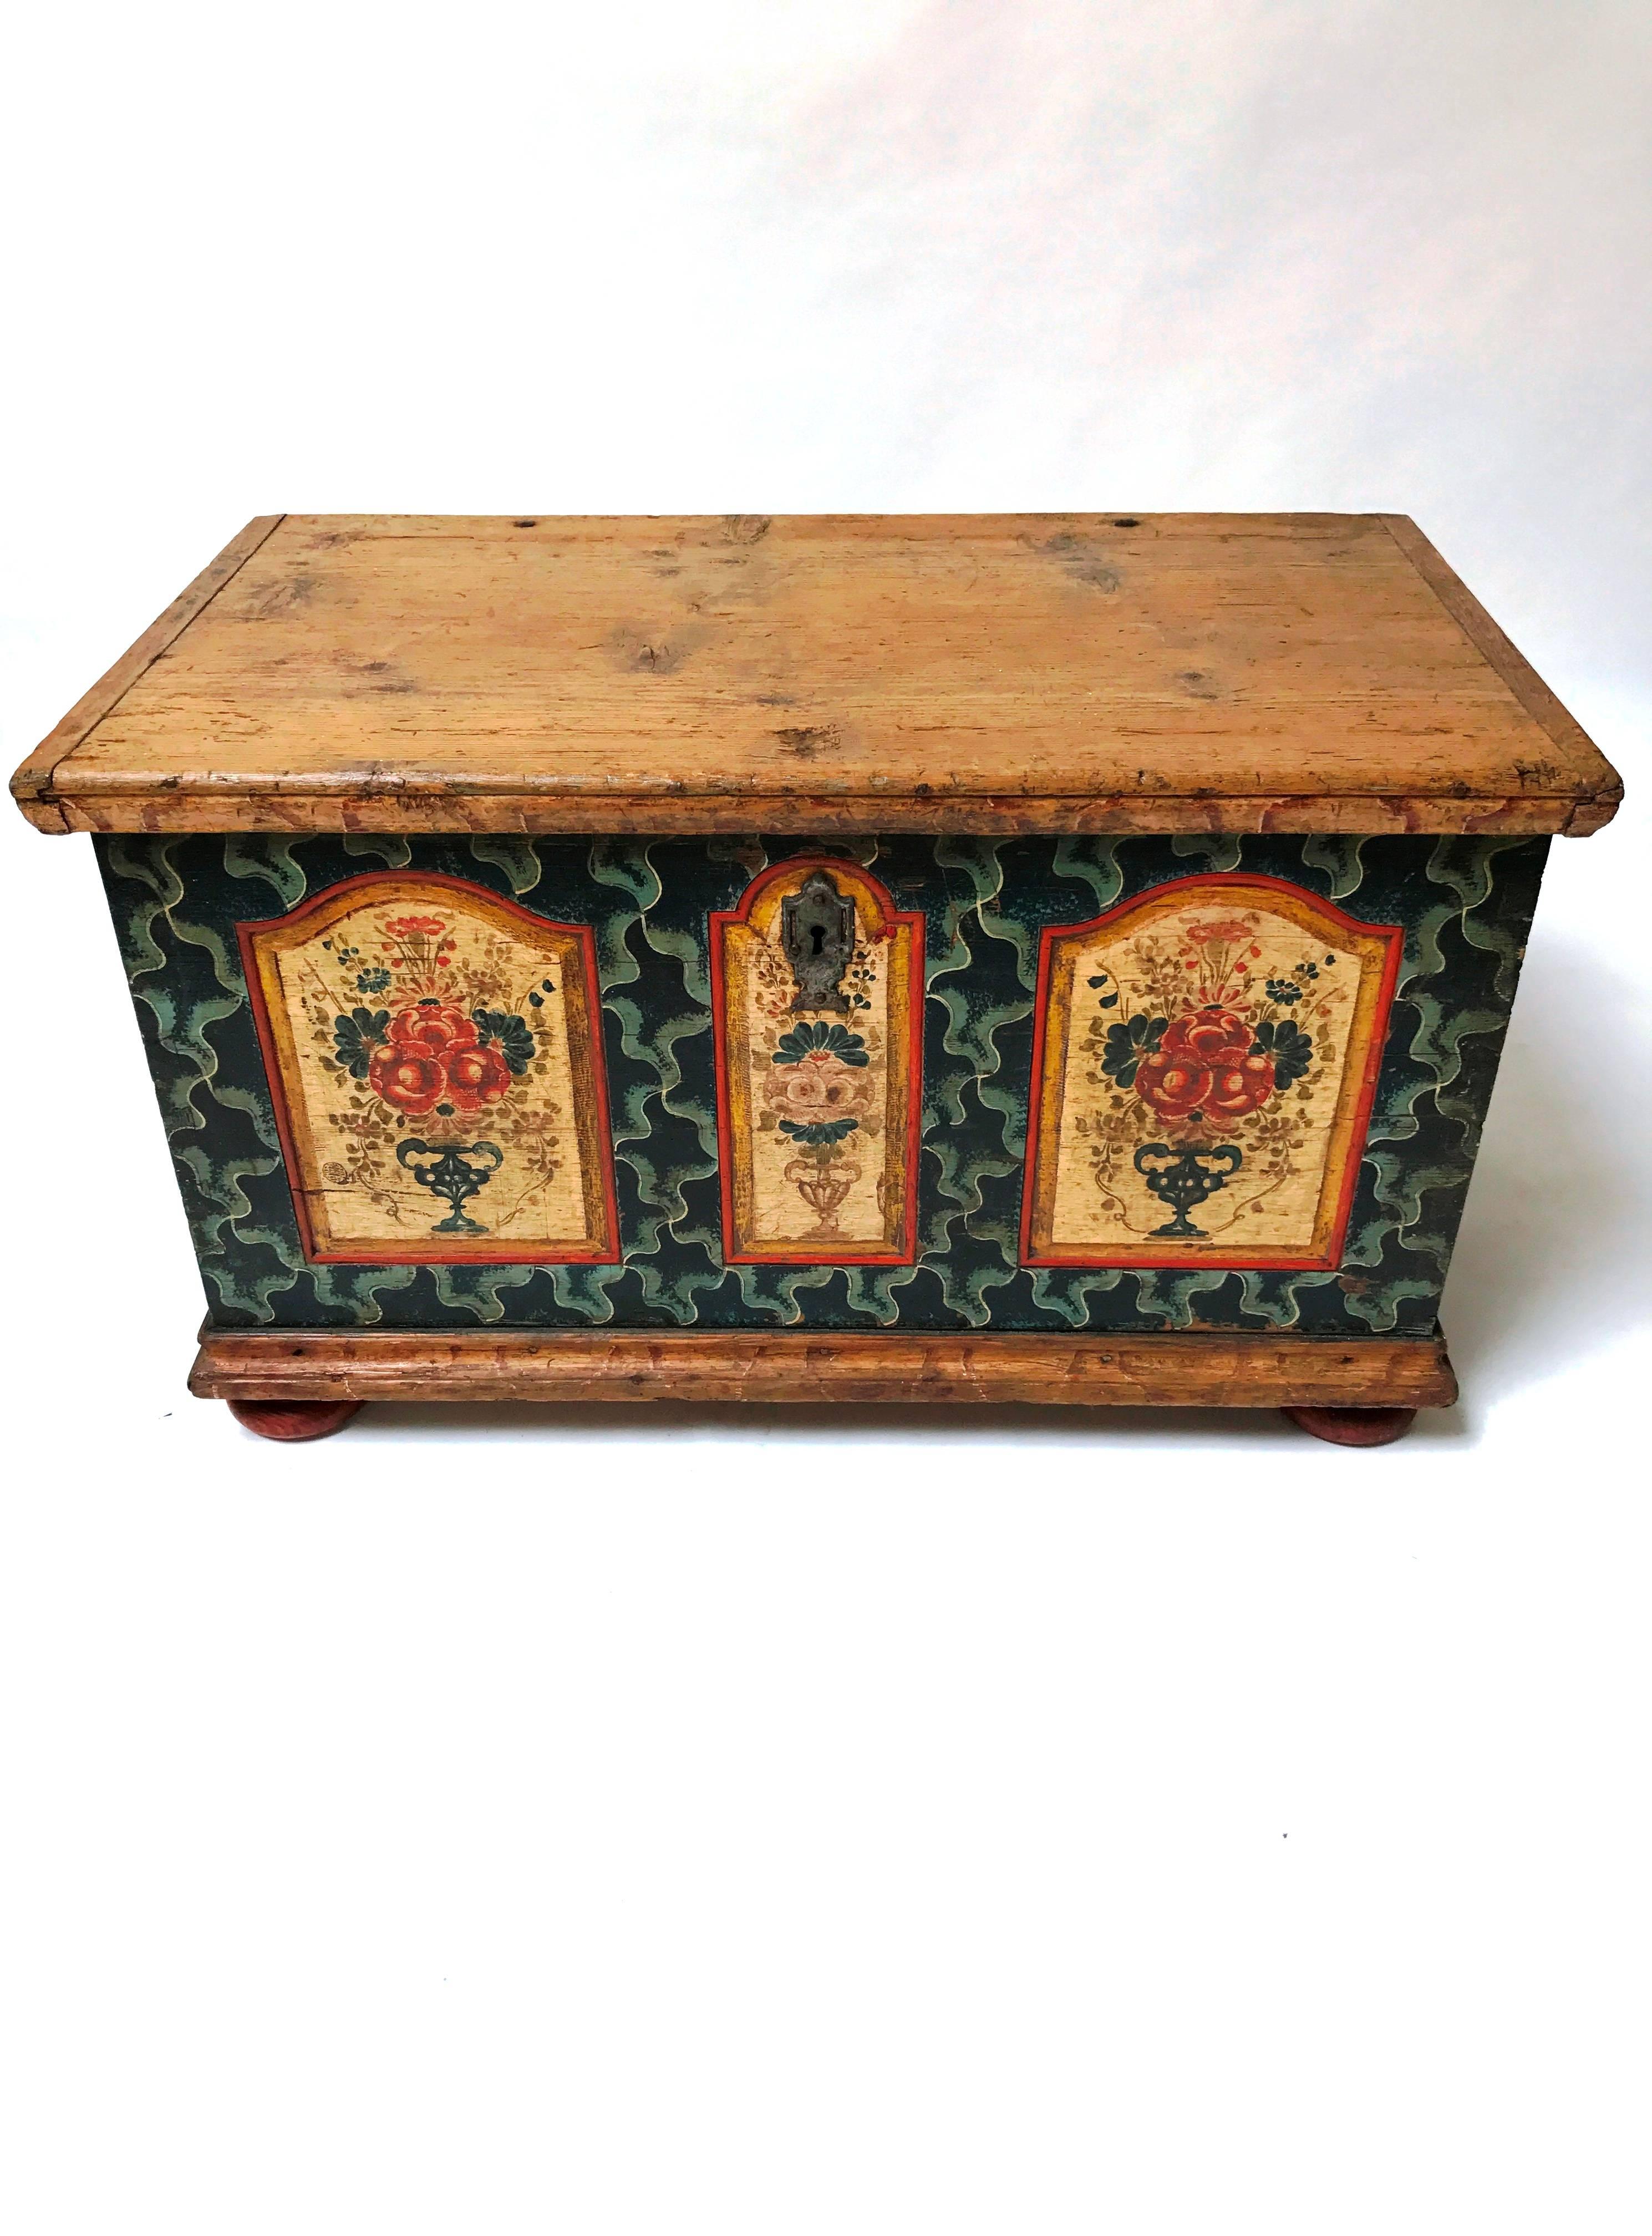 A nicely painted chest from Austria on feet, circa 1780